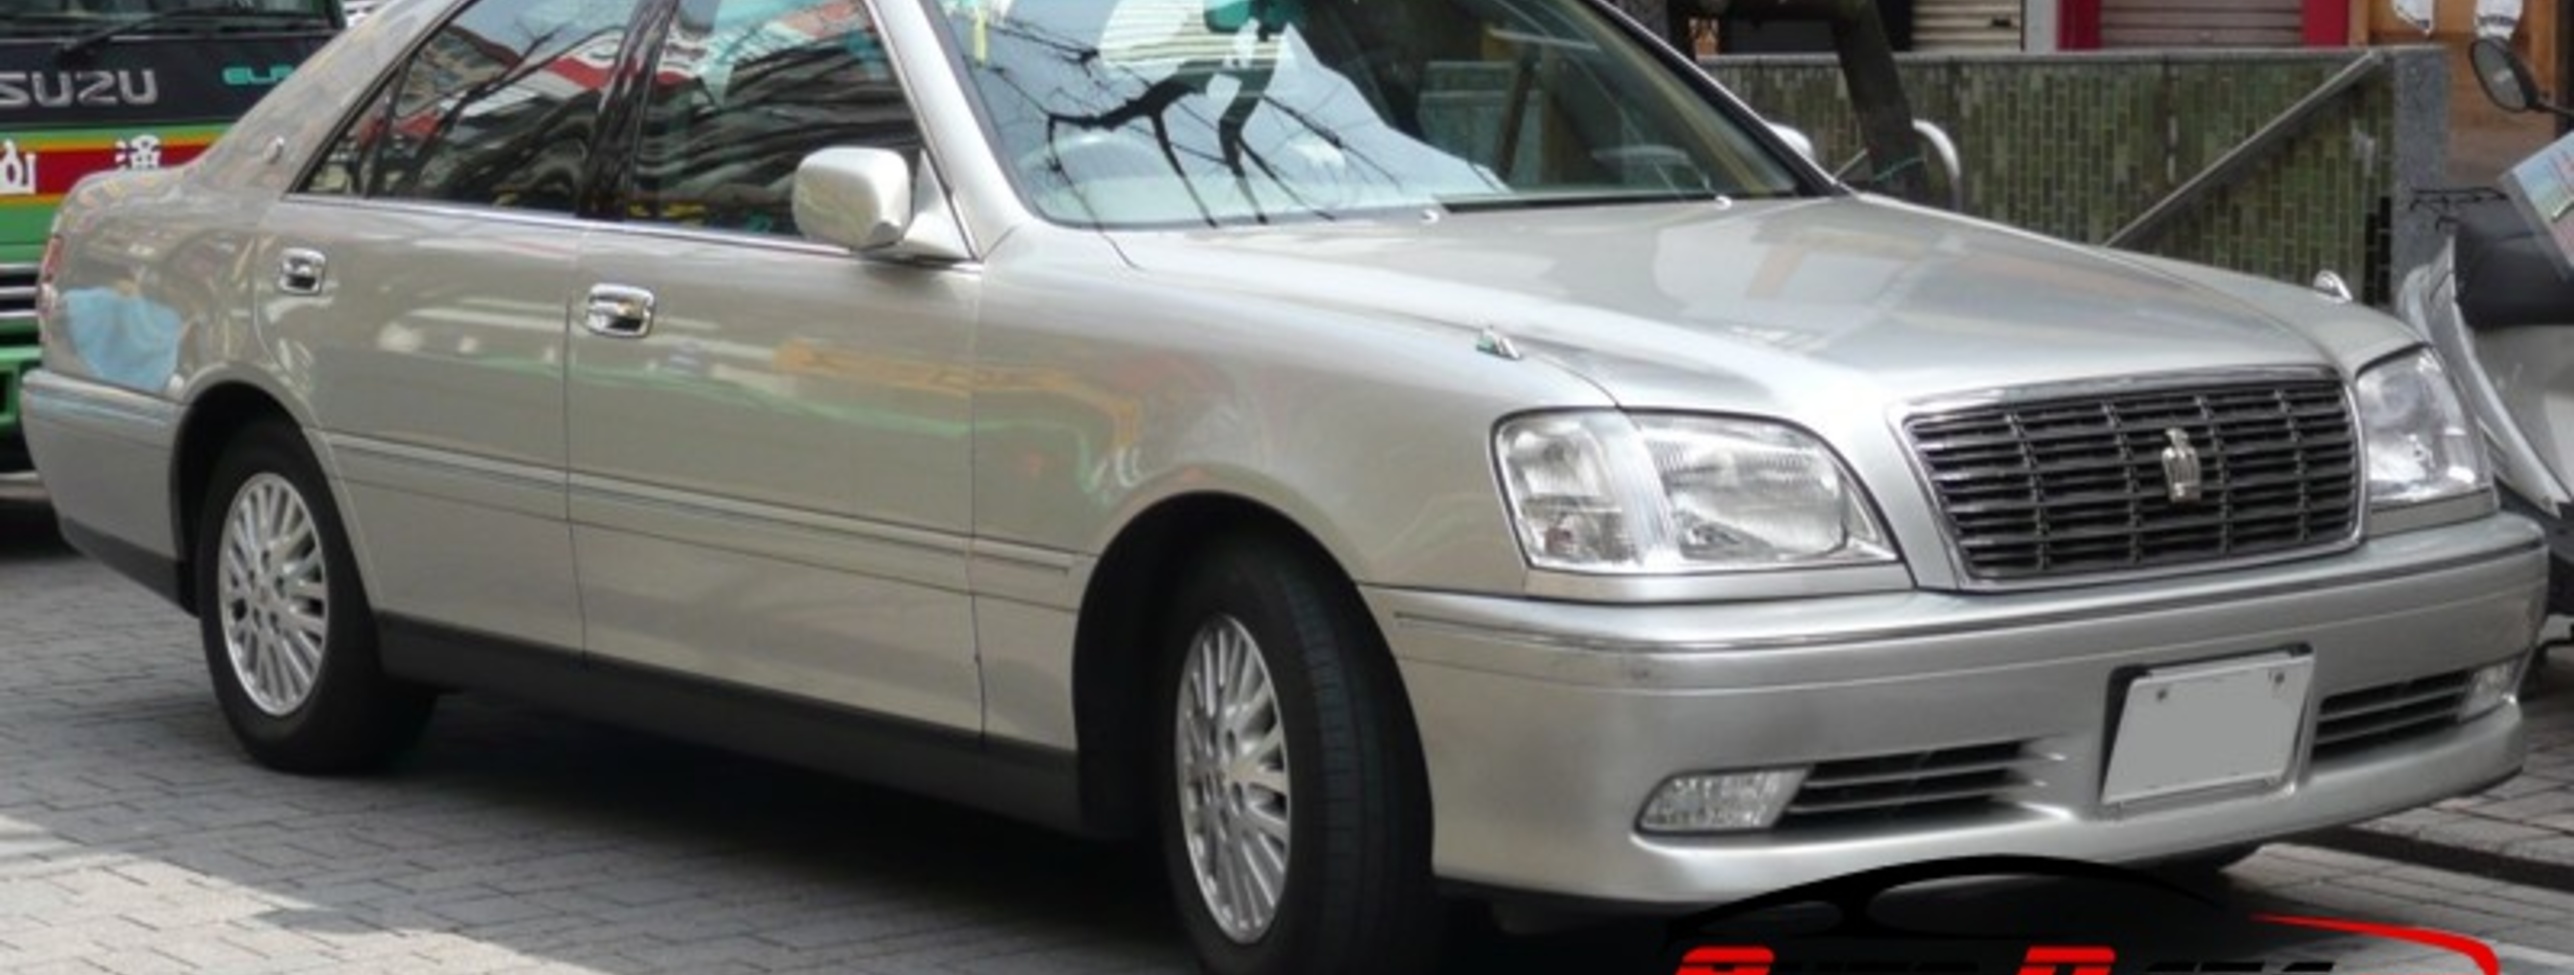 Toyota Crown Royal XI (S170, facelift 2001) 3.0 (200 Hp) Mild Hybrid Automatic 2001, 2002, 2003 